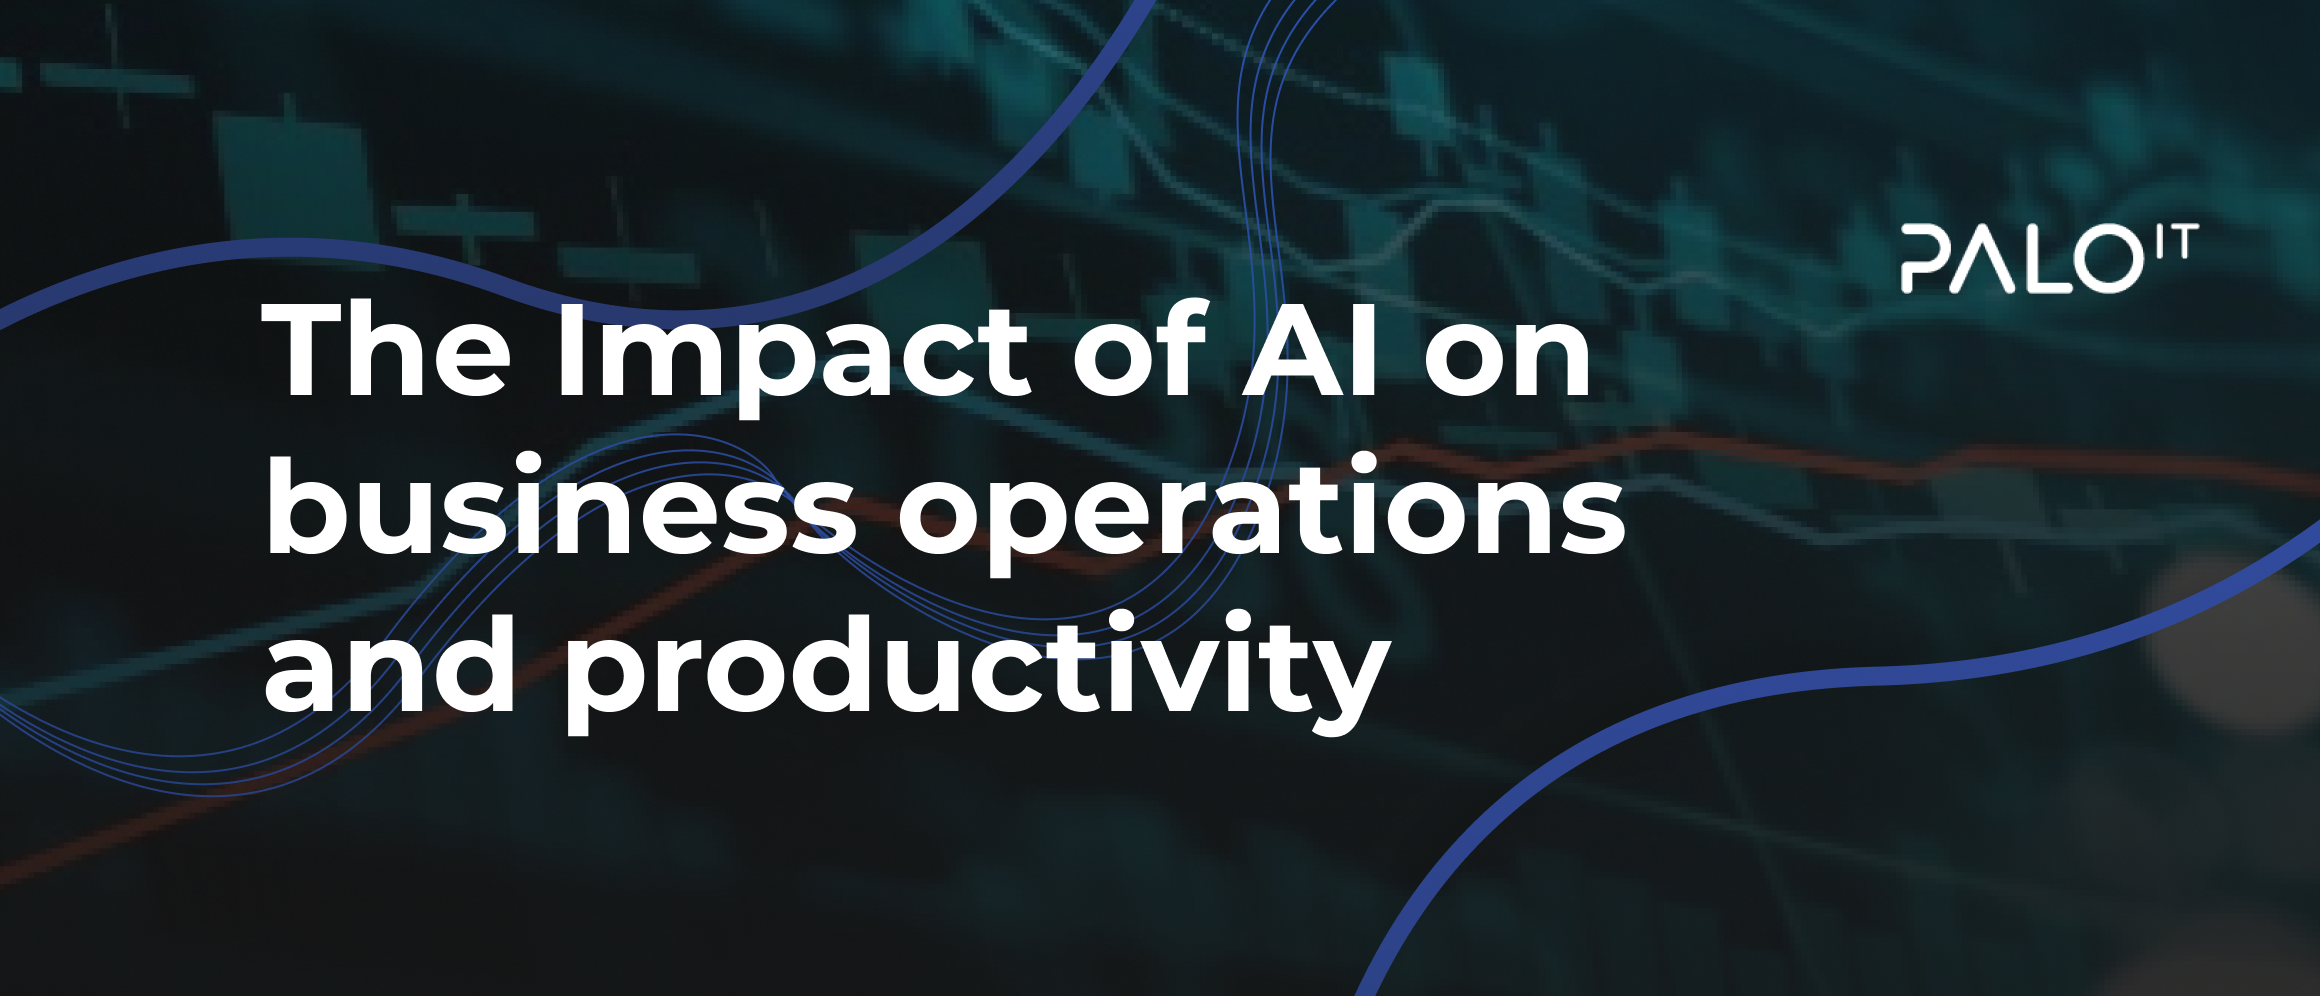 The impact of AI on business operations and productivity